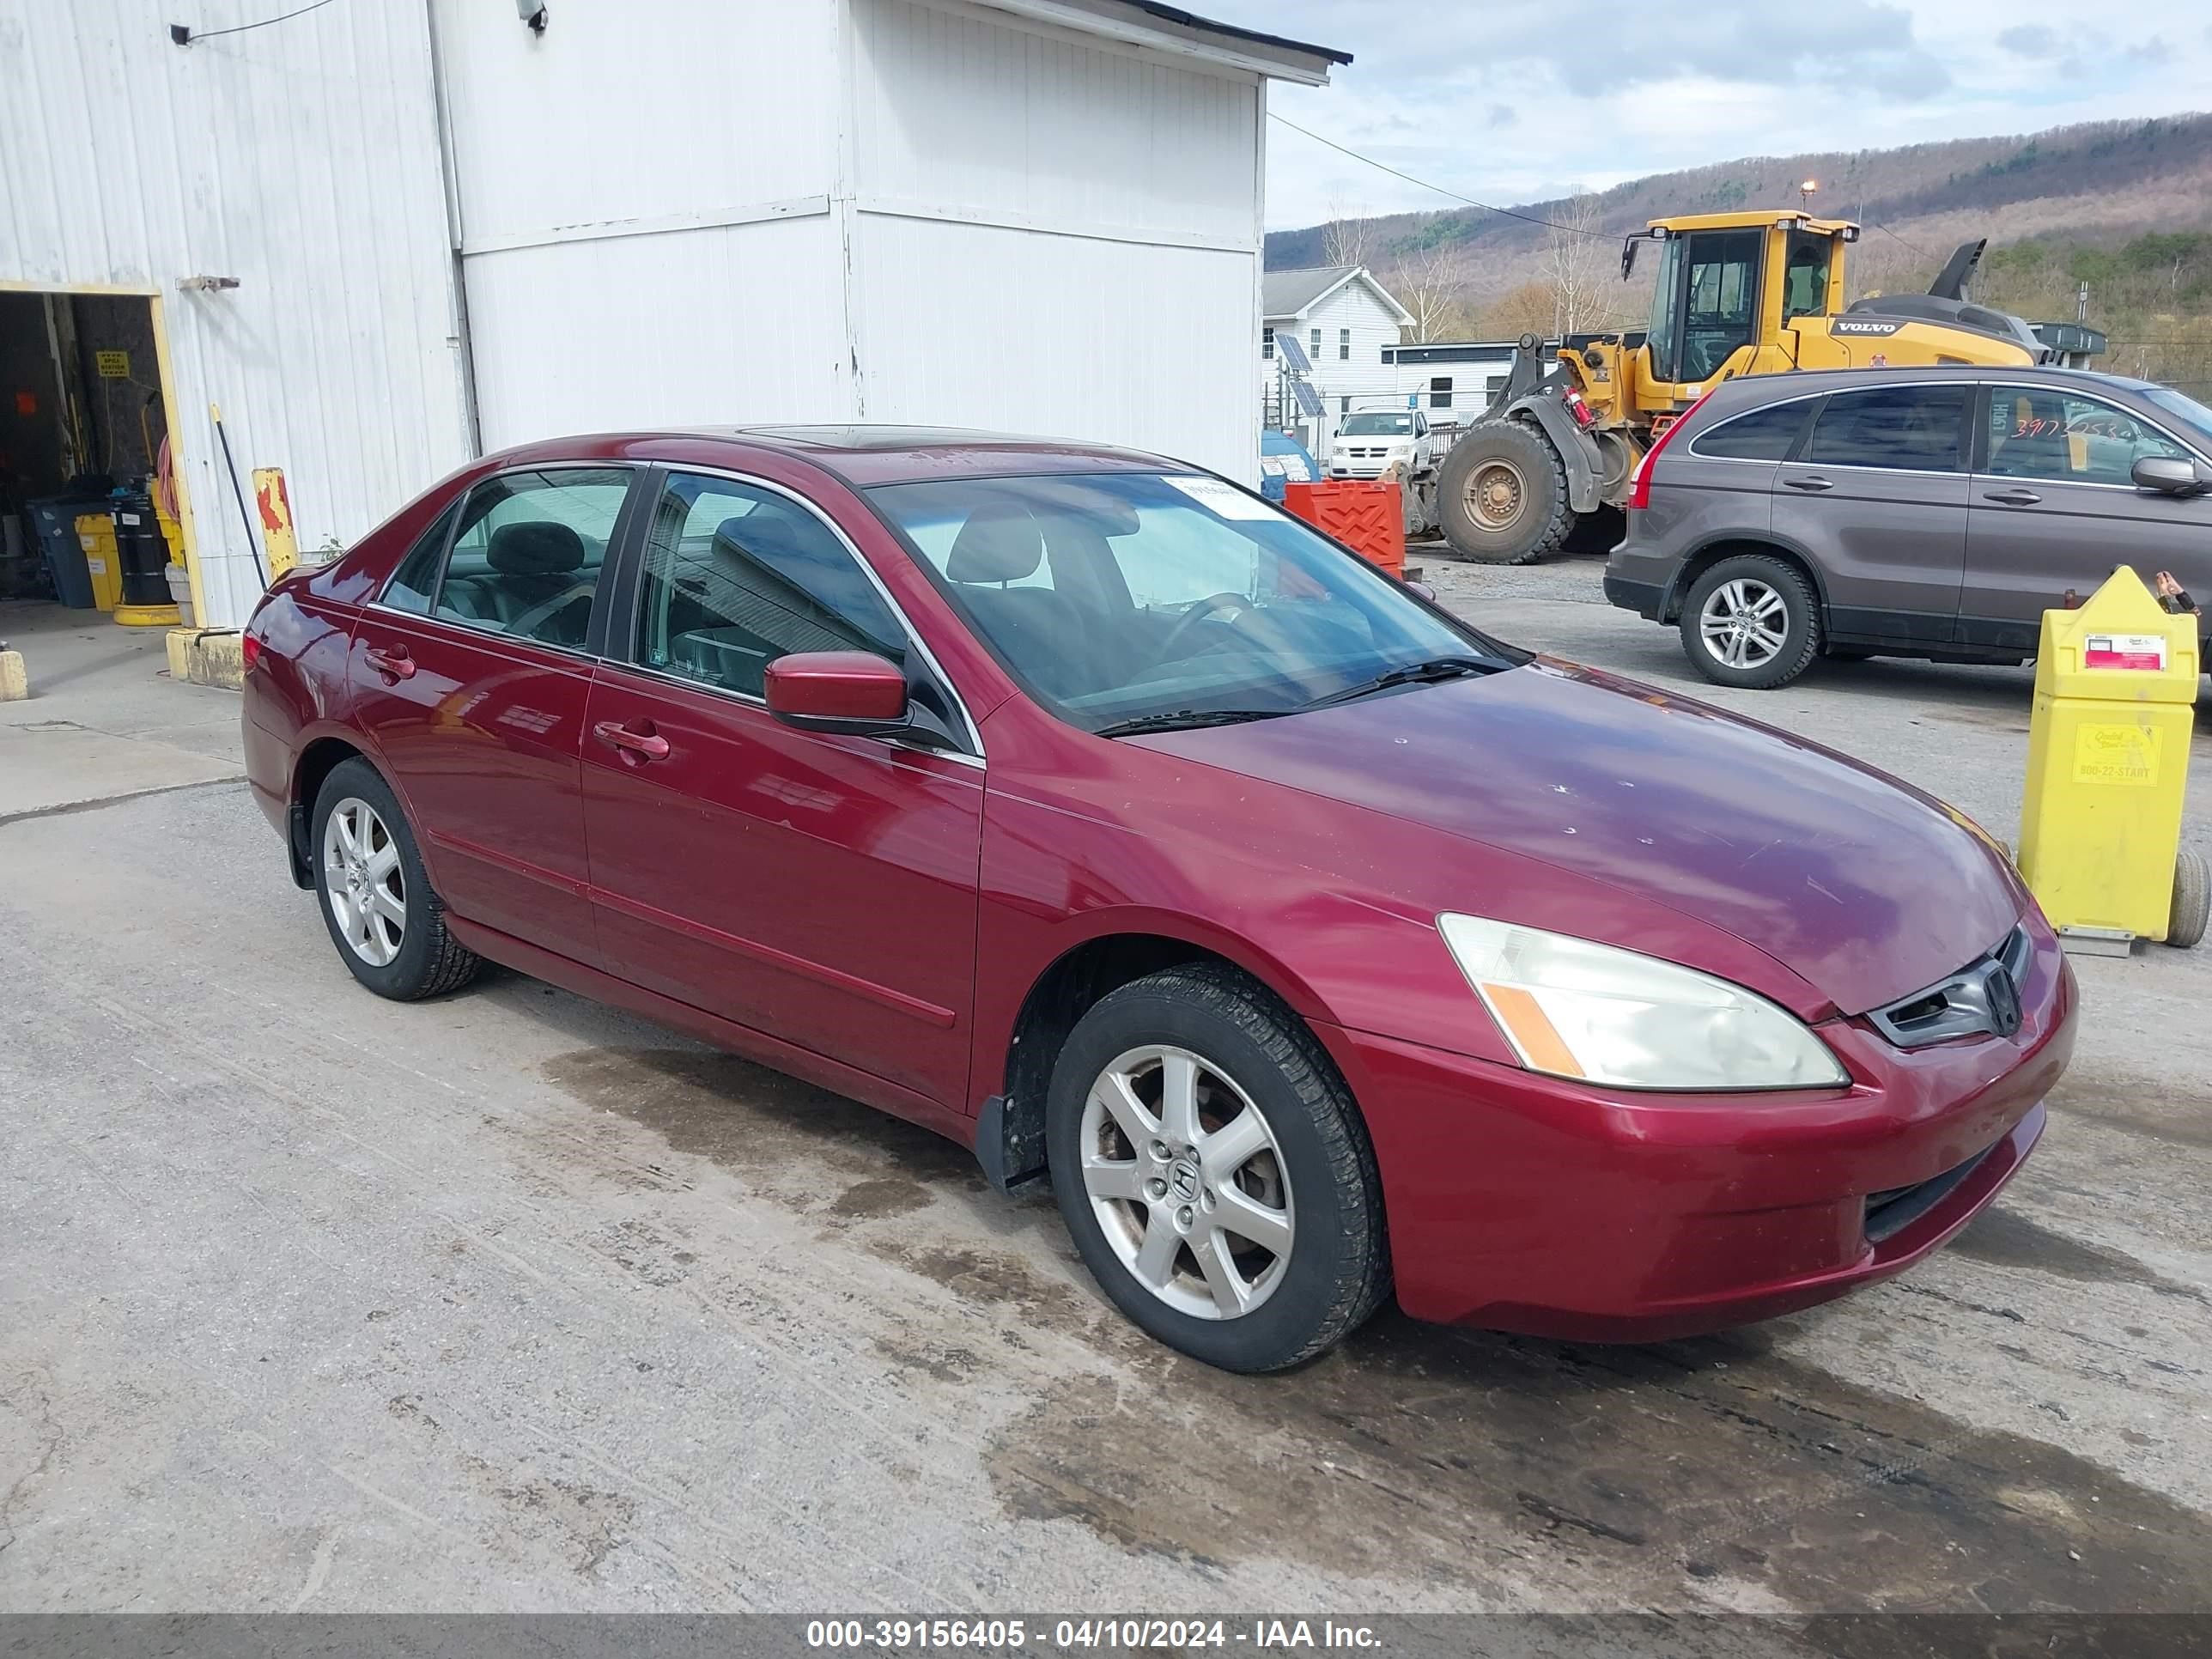 vin: 1HGCM66595A048803 1HGCM66595A048803 2005 honda accord 3000 for Sale in 16637, 15369 Dunnings Hwy, East Freedom, Pennsylvania, USA